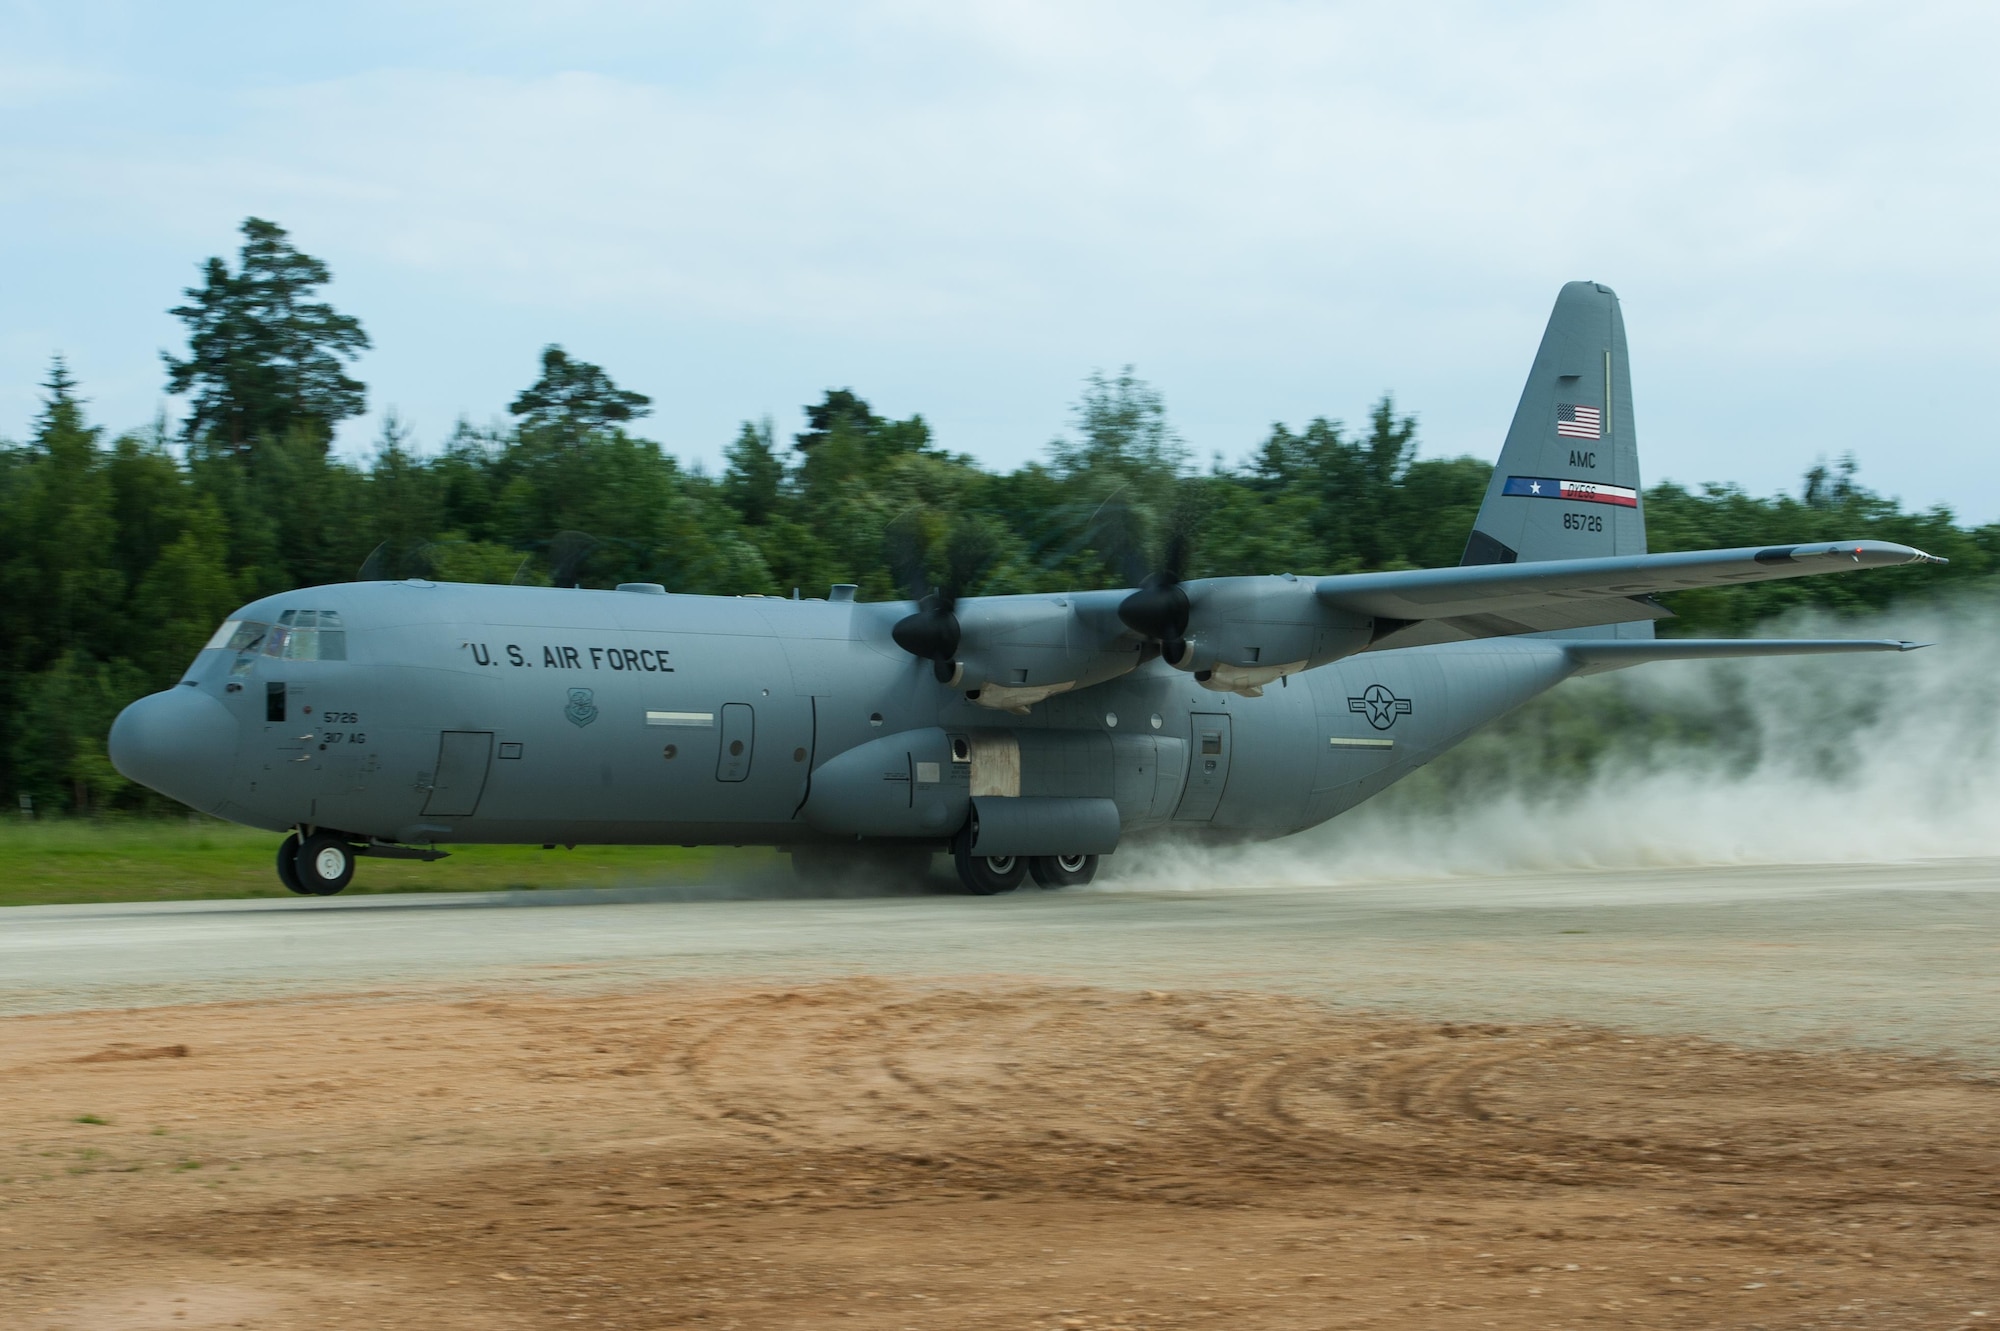 A U.S. Air Force C-130J Super Hercules Aircraft from Dyess Air Force Base, Texas, takes off during Exercise Swift Response 16 at Hohenfels Training Area, Germany, June 17, 2016. Exercise SR16 is one of the premier military crisis response training events for multinational airborne forces in the world, the exercise has more than 5,000 participants from 10 NATO nations. (U.S. Air Force photo by Master Sgt. Joseph Swafford/Released) 
